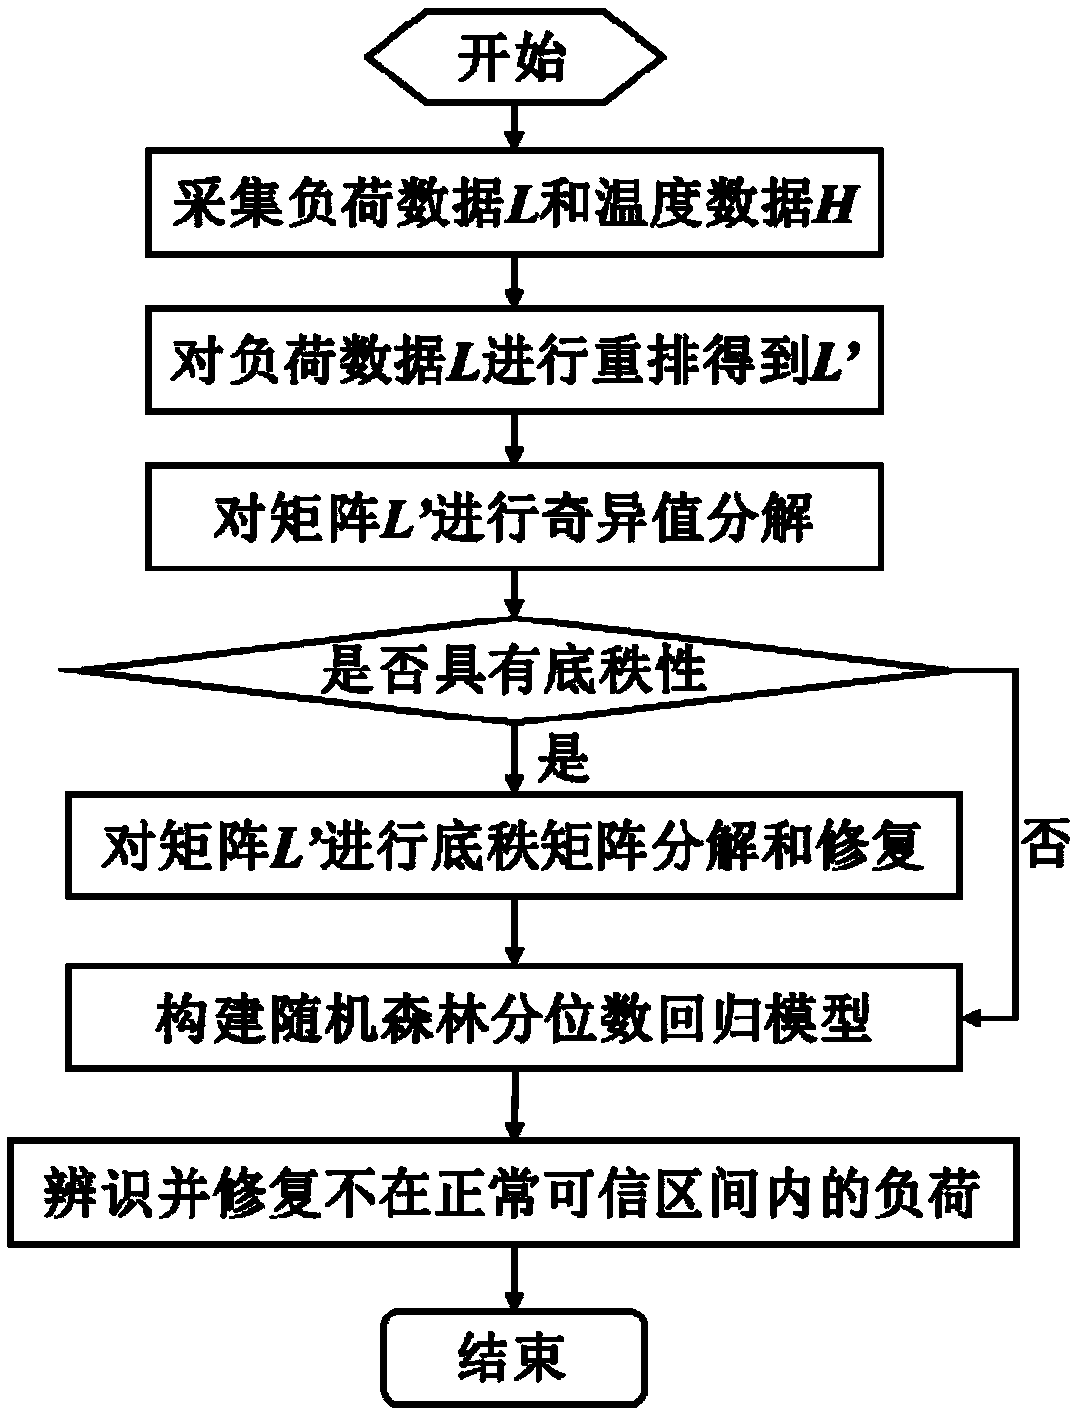 A power system distribution substation load data abnormity detection and repair method